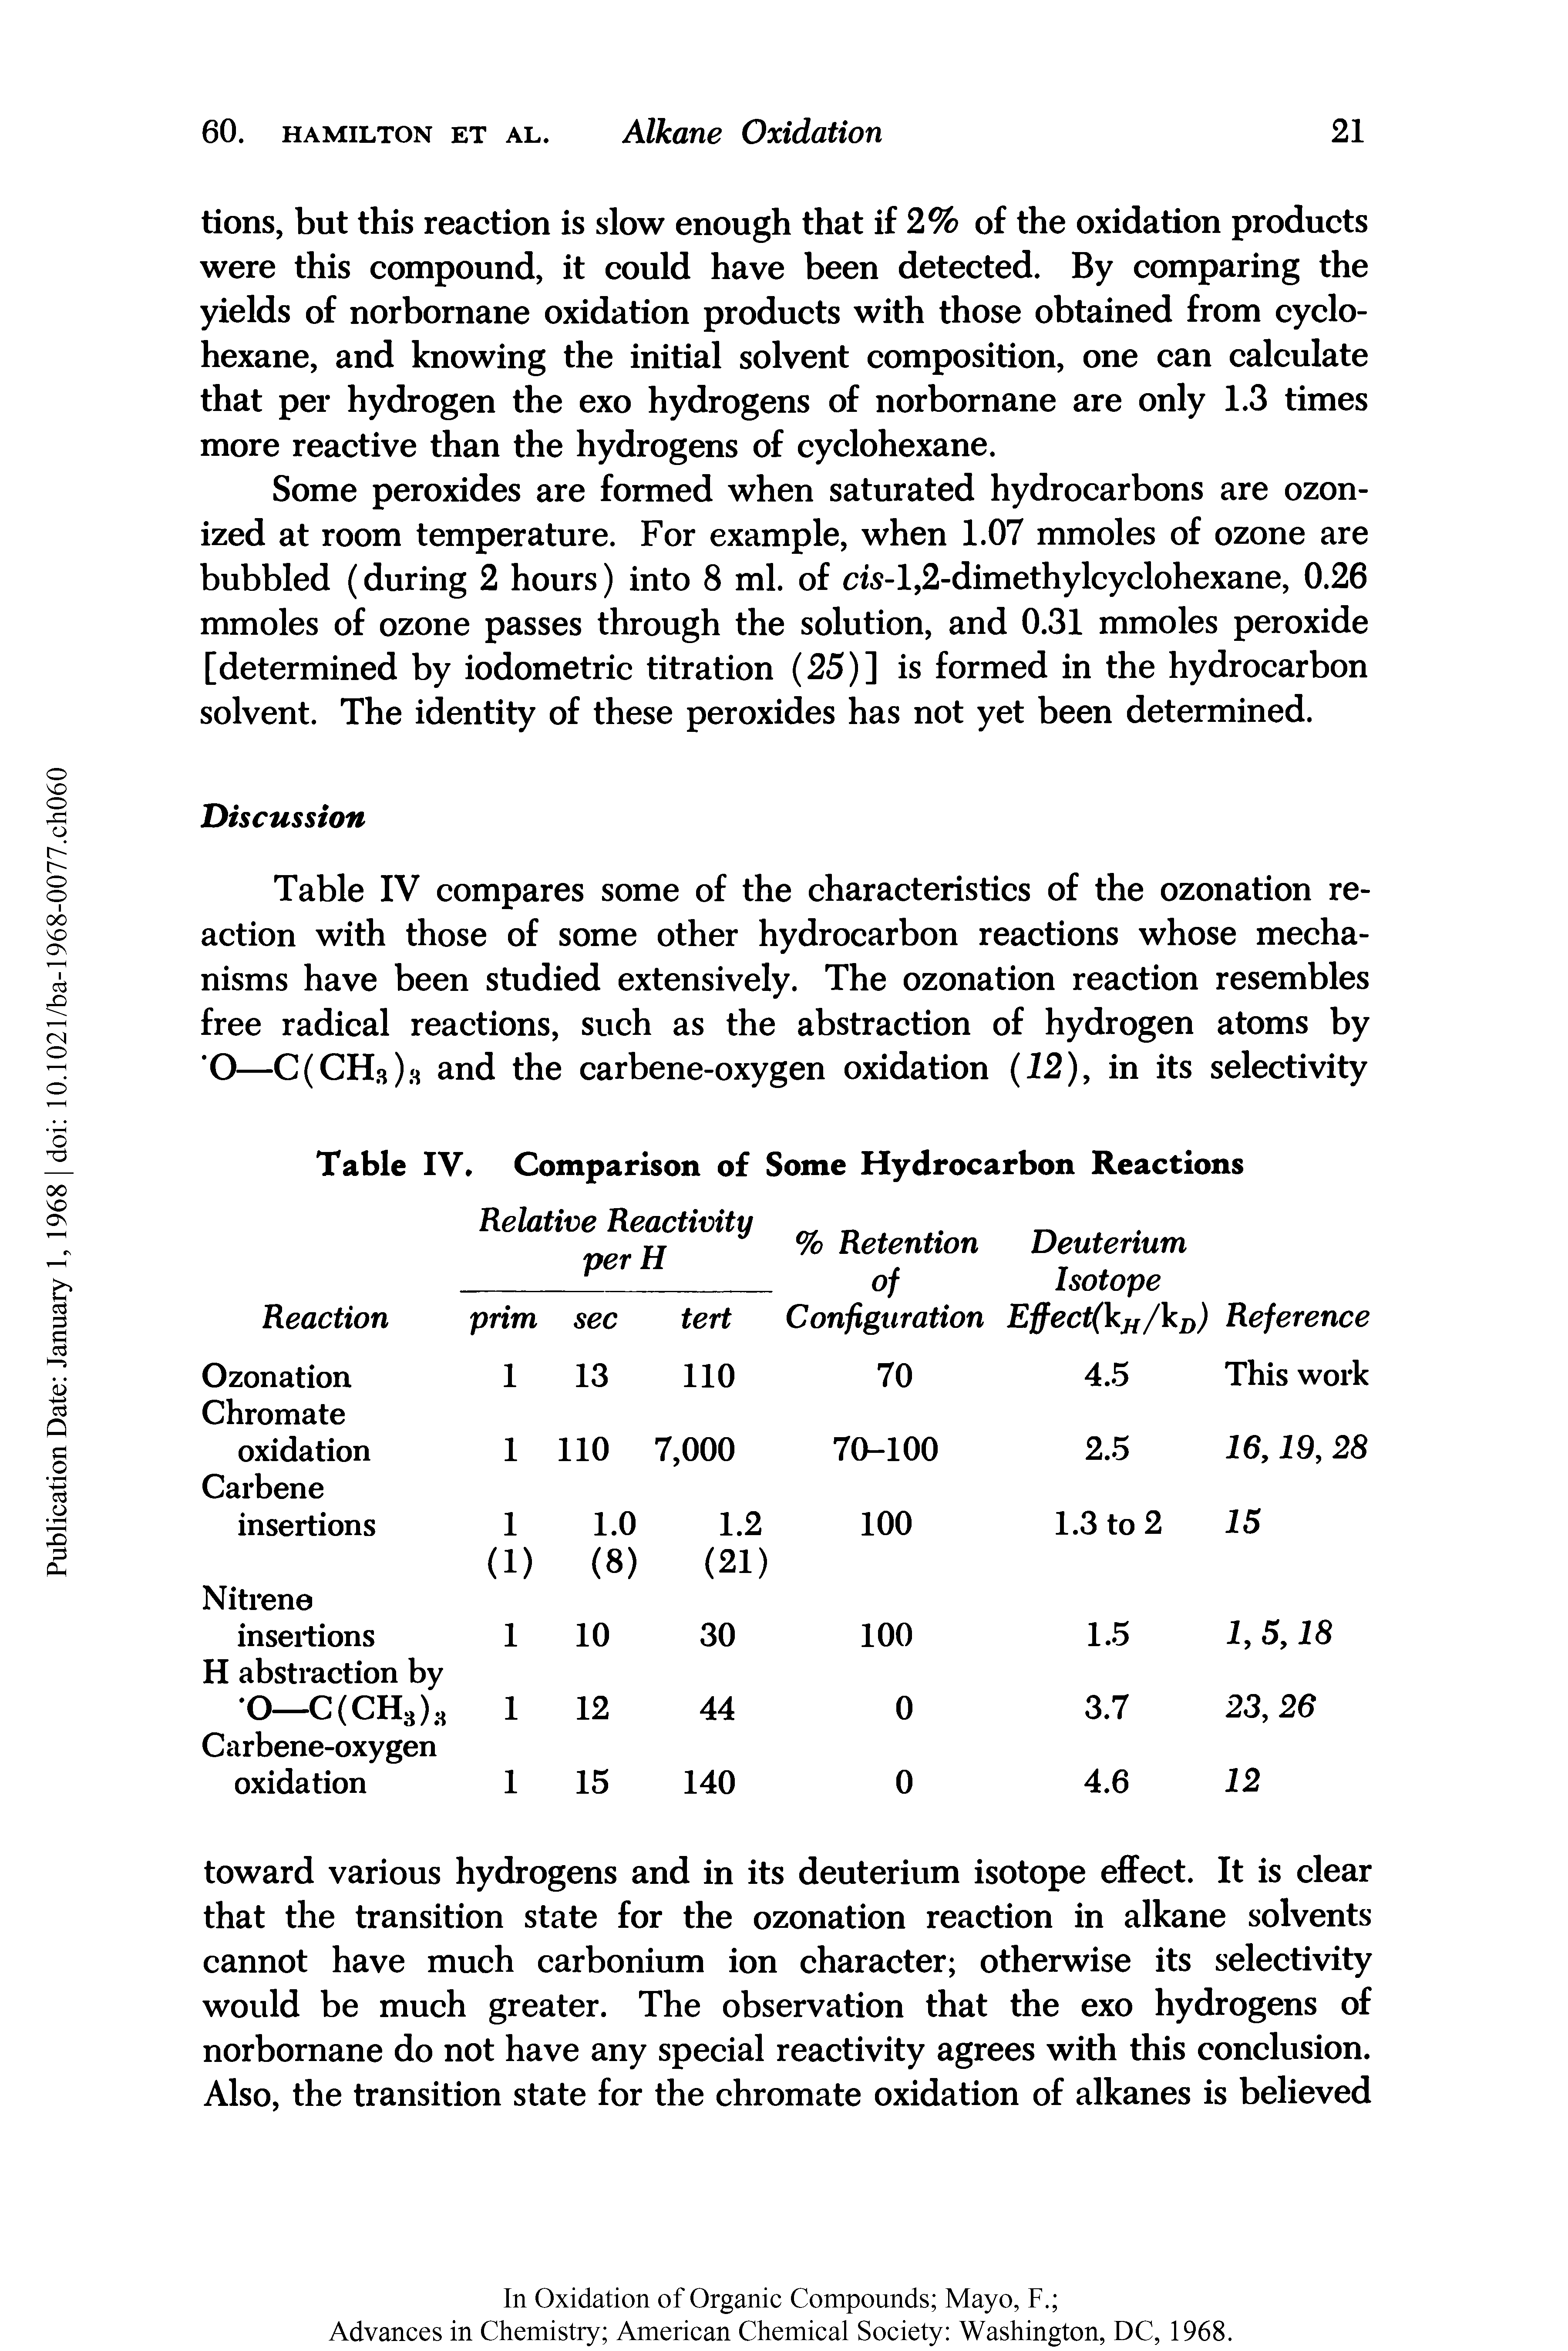 Table IV compares some of the characteristics of the ozonation reaction with those of some other hydrocarbon reactions whose mechanisms have been studied extensively. The ozonation reaction resembles free radical reactions, such as the abstraction of hydrogen atoms by O—C(CH3)8 and the carbene-oxygen oxidation (12), in its selectivity...